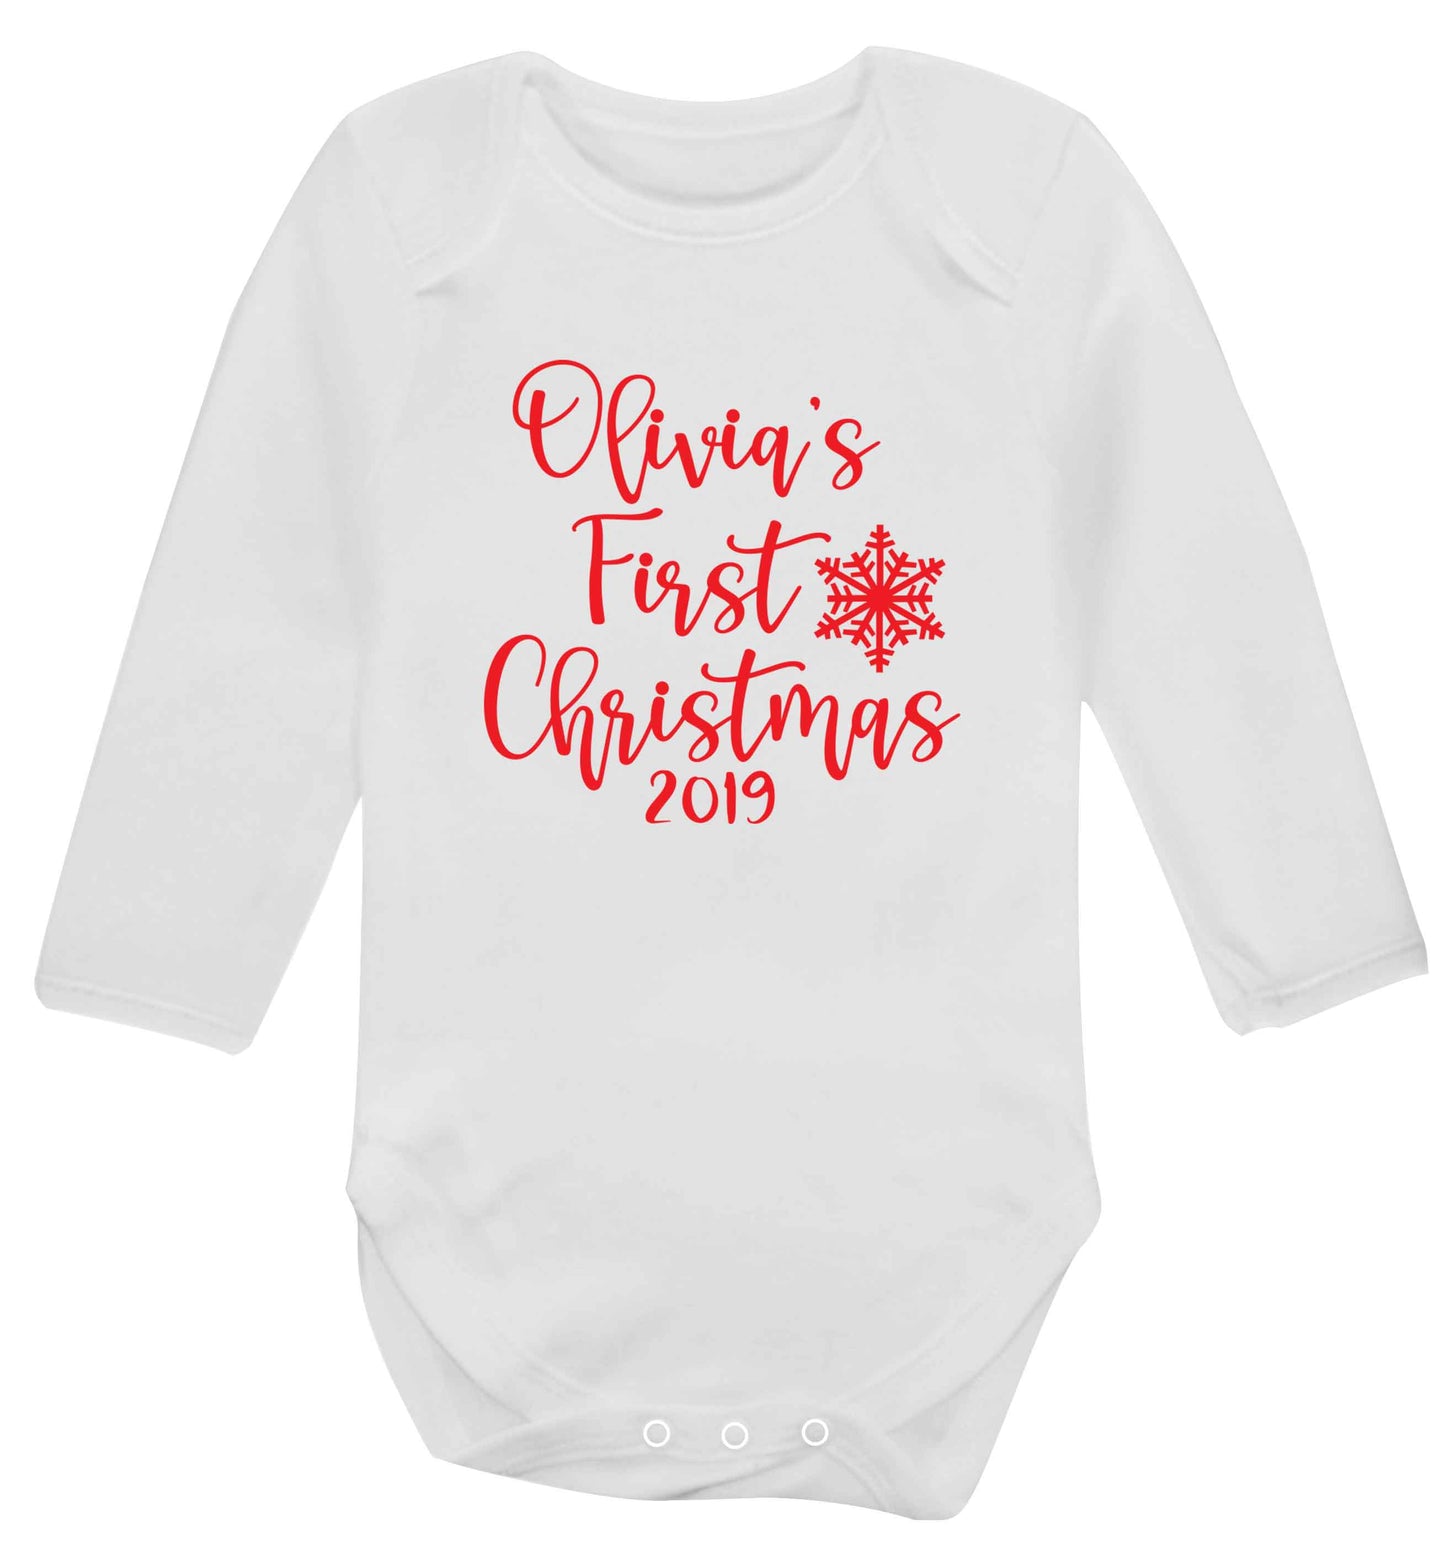 Personalised first Christmas - script text baby vest long sleeved white 6-12 months